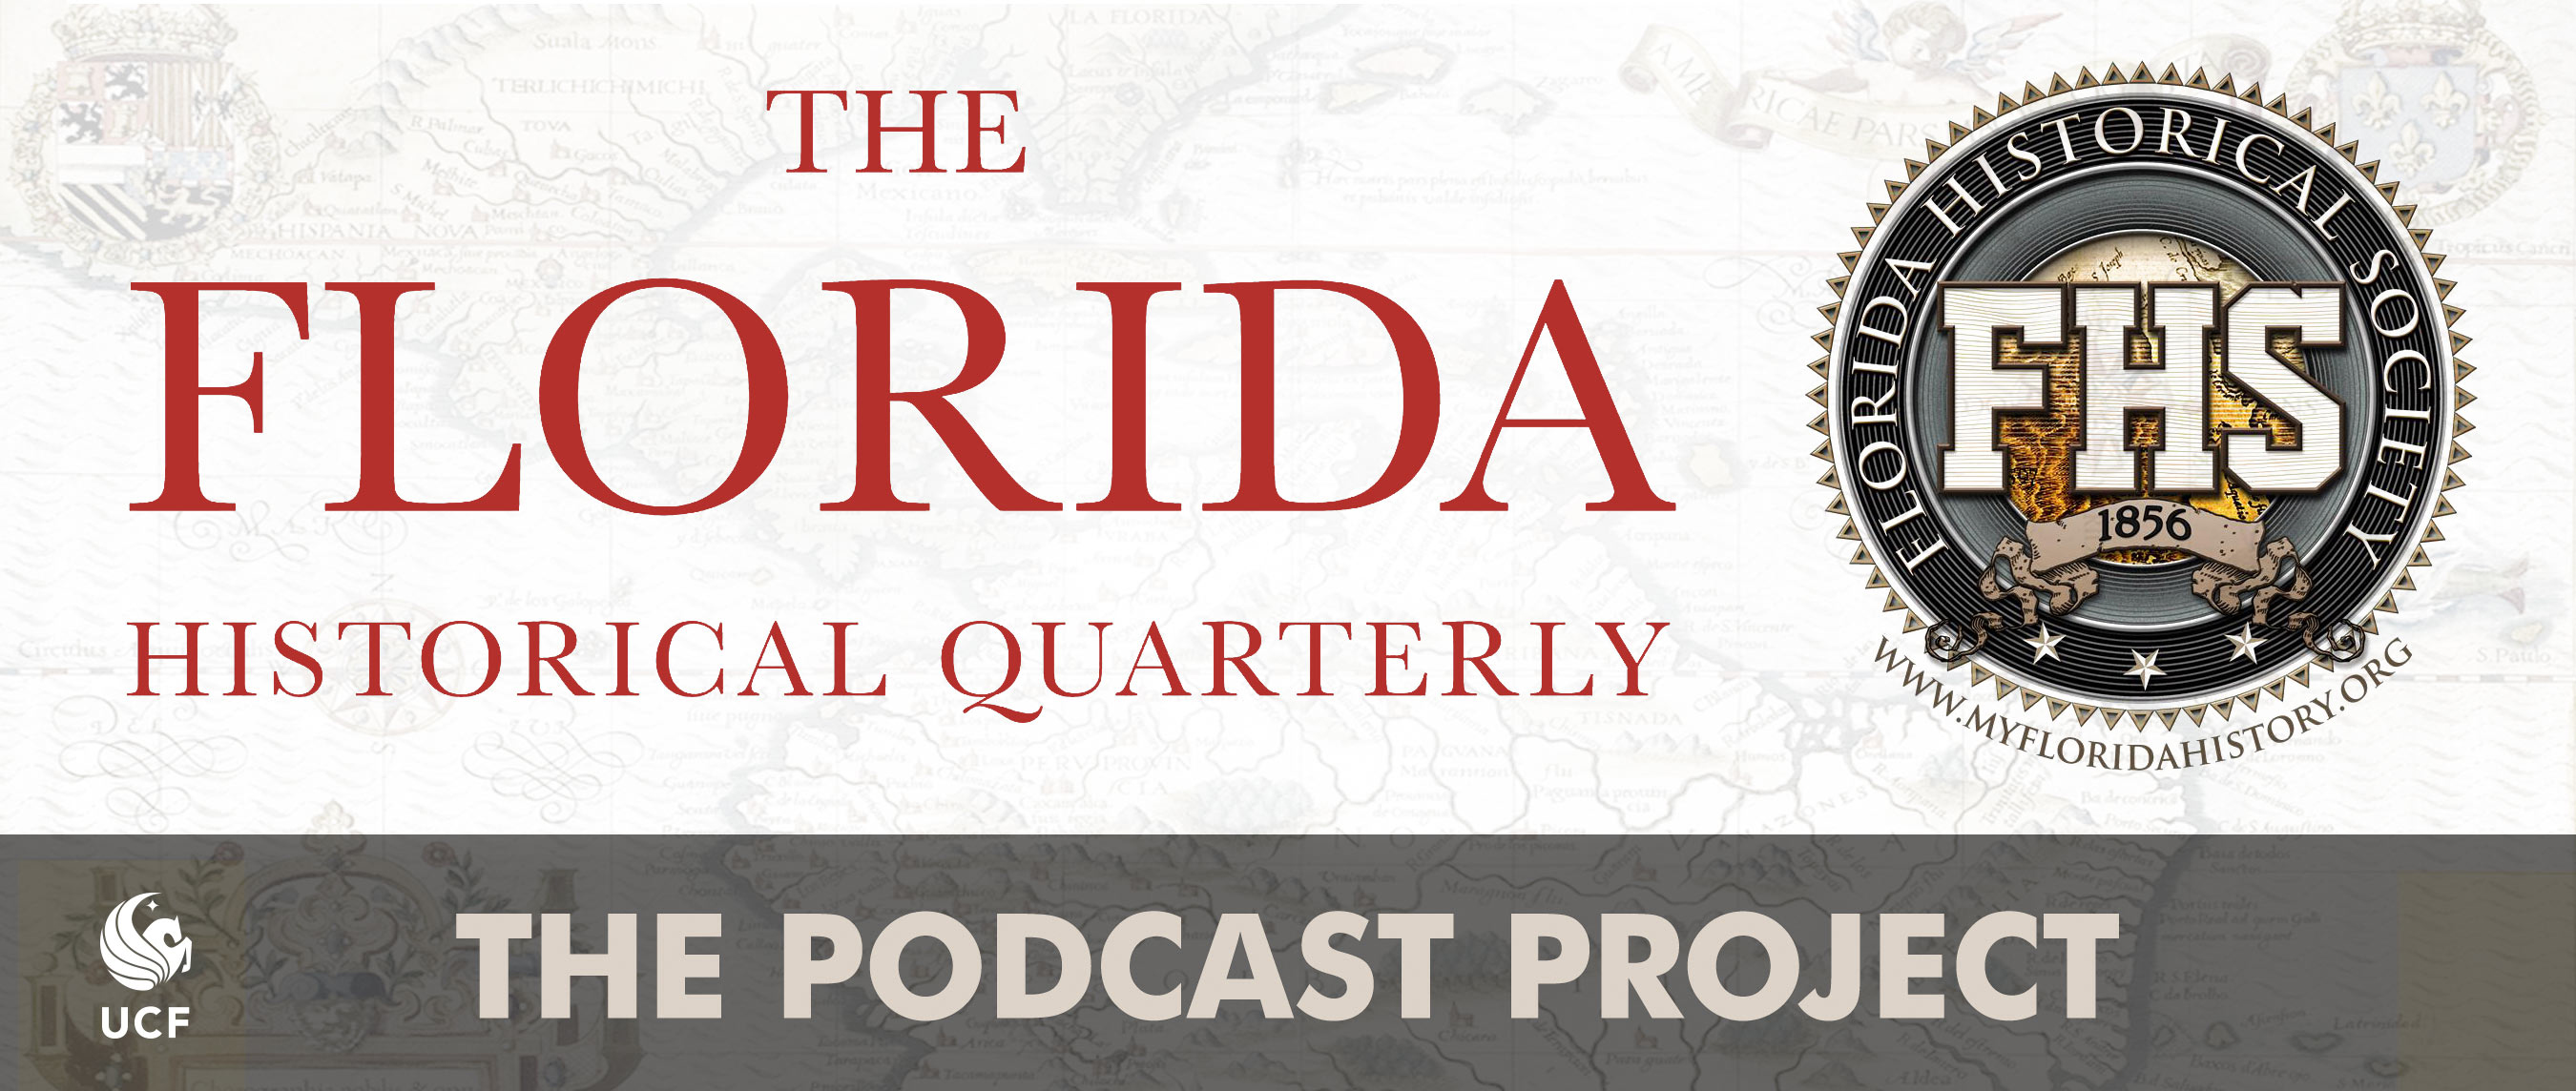 Florida Historical Quarterly Podcast Project